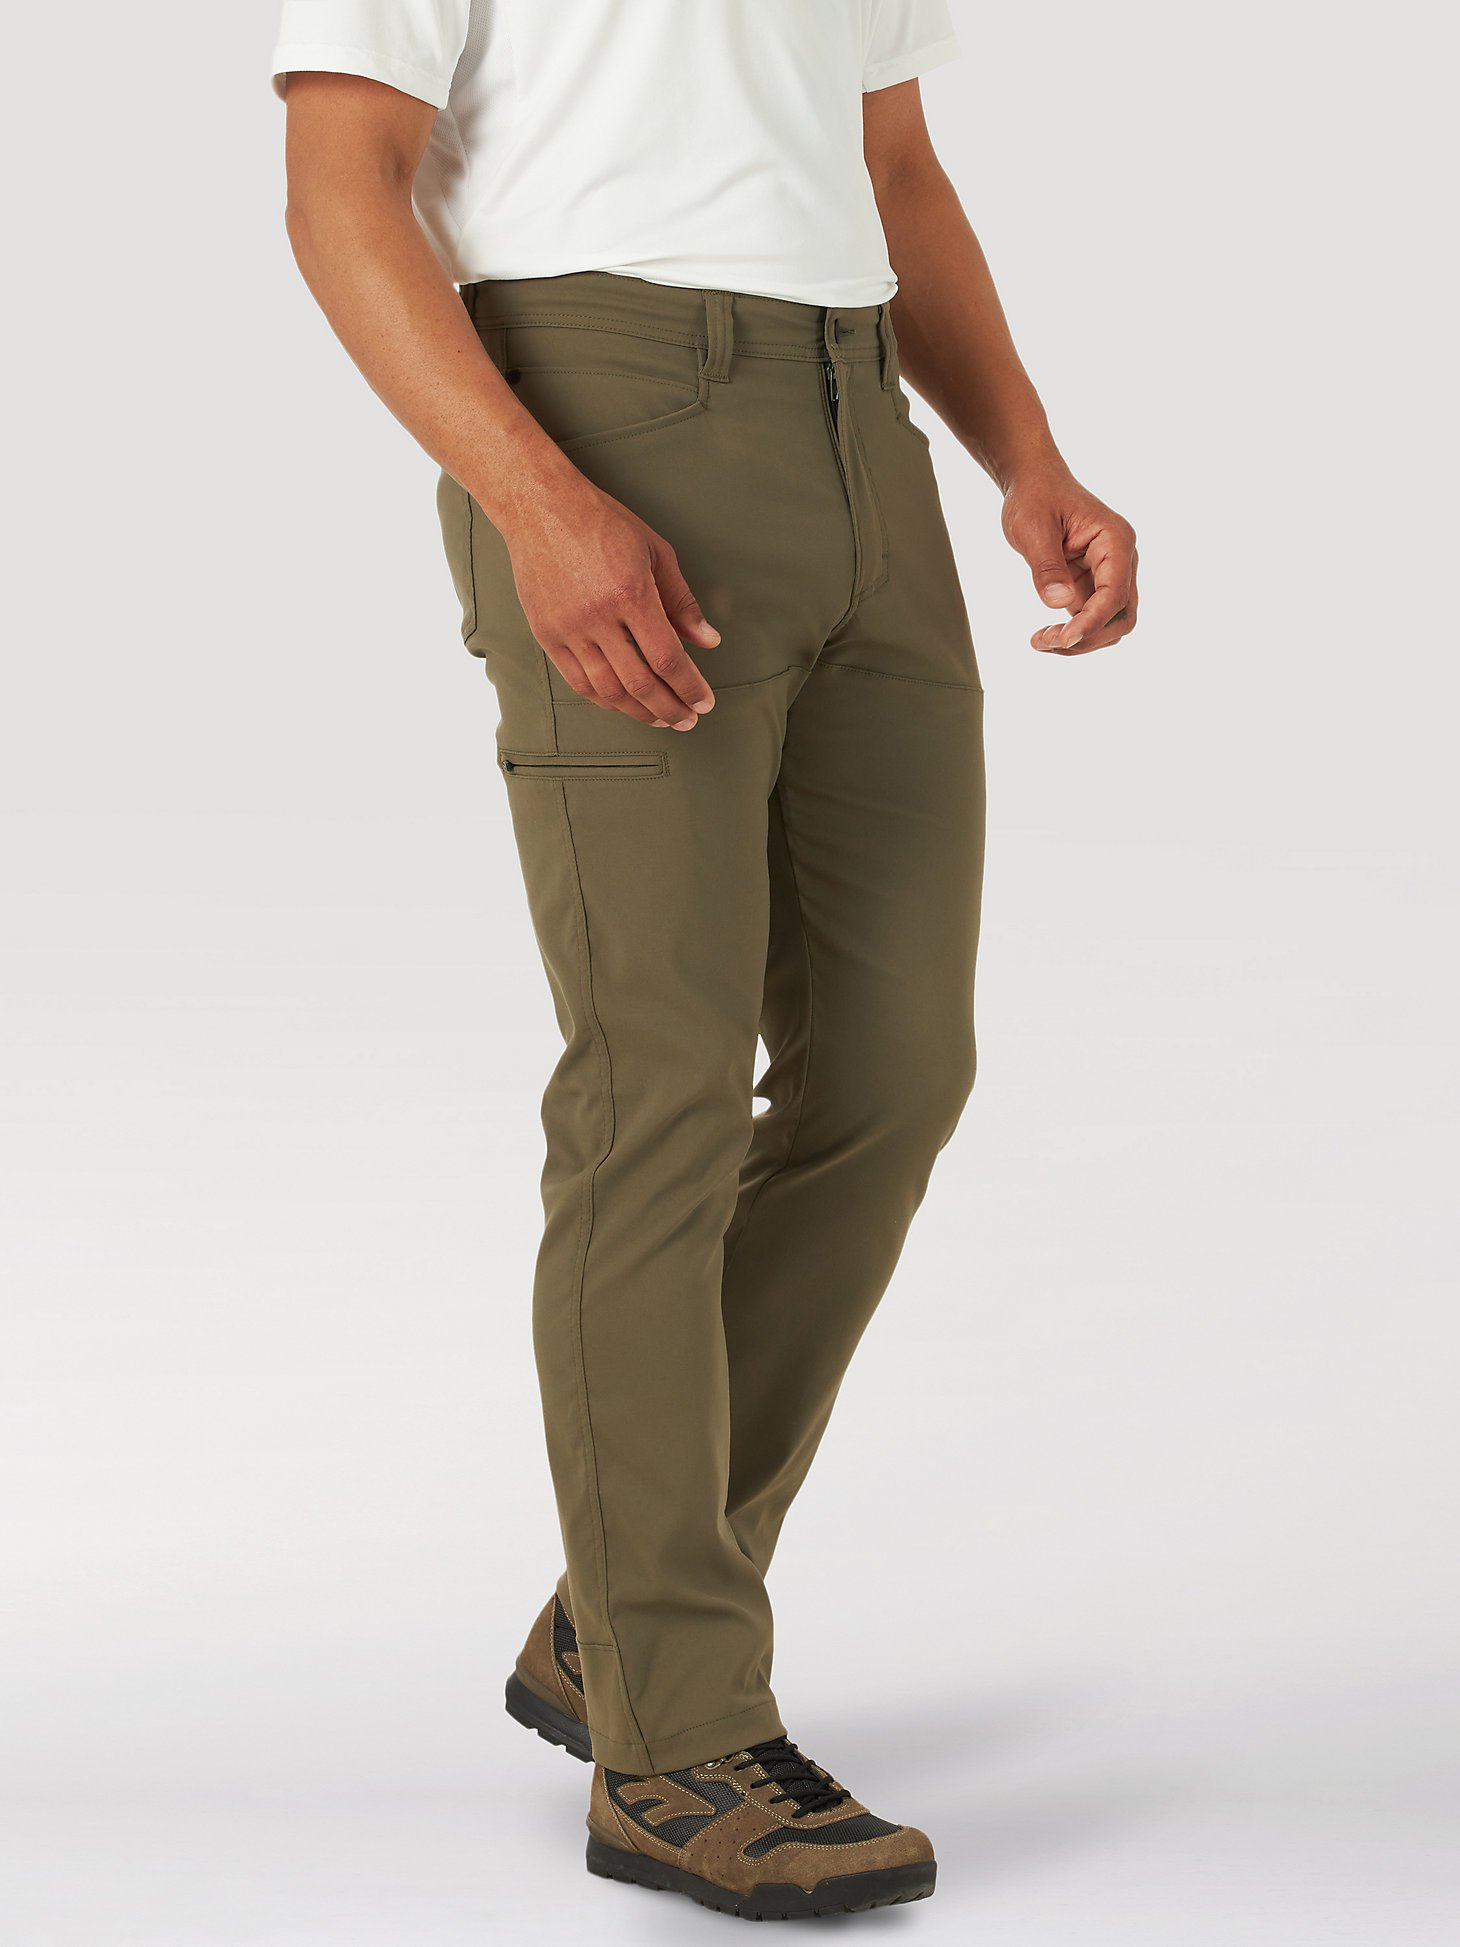 5 Great Pants For Your Backpack Hunt— By Land